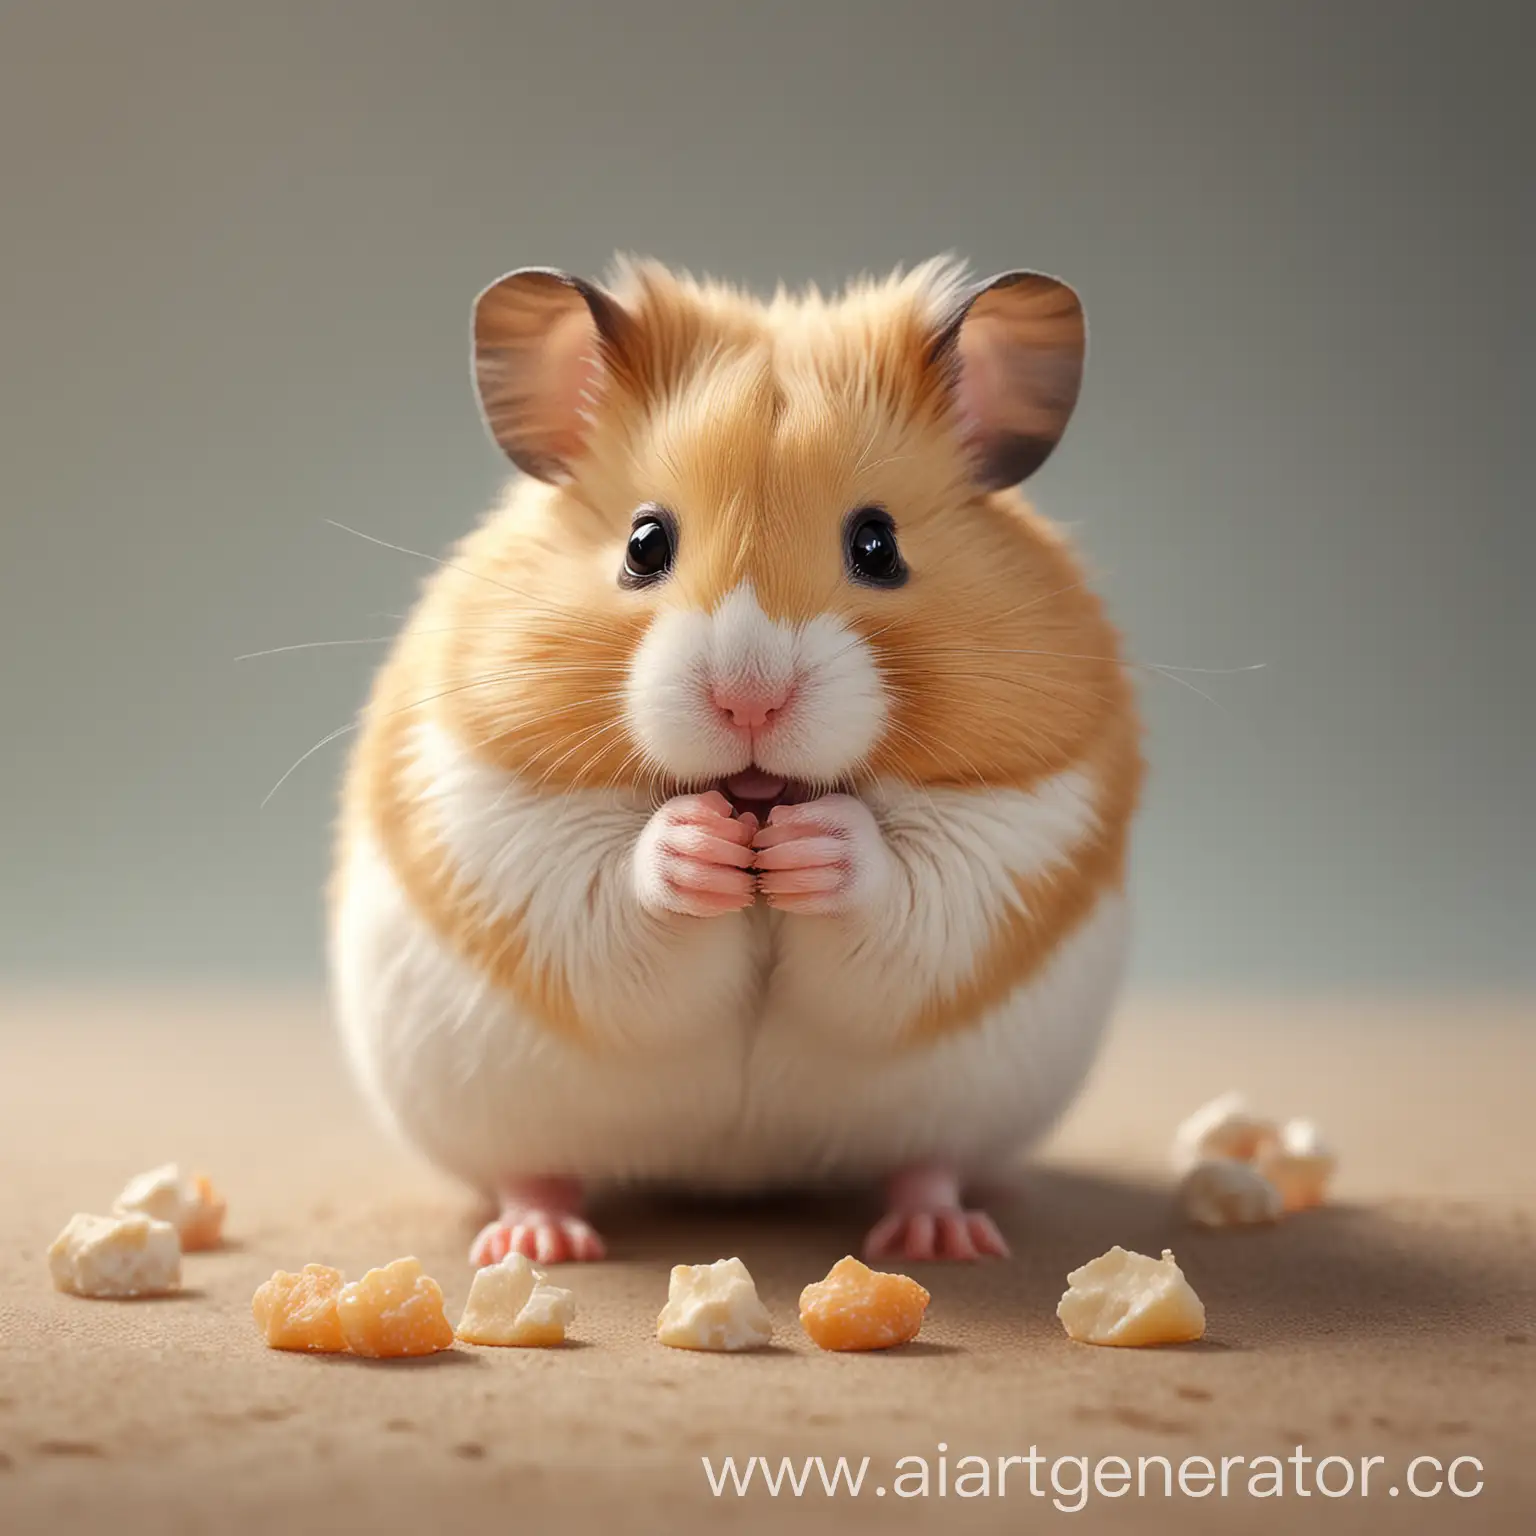 Adorable-Realistic-Hamster-Photography-Capturing-the-Charm-of-a-Tiny-Companion